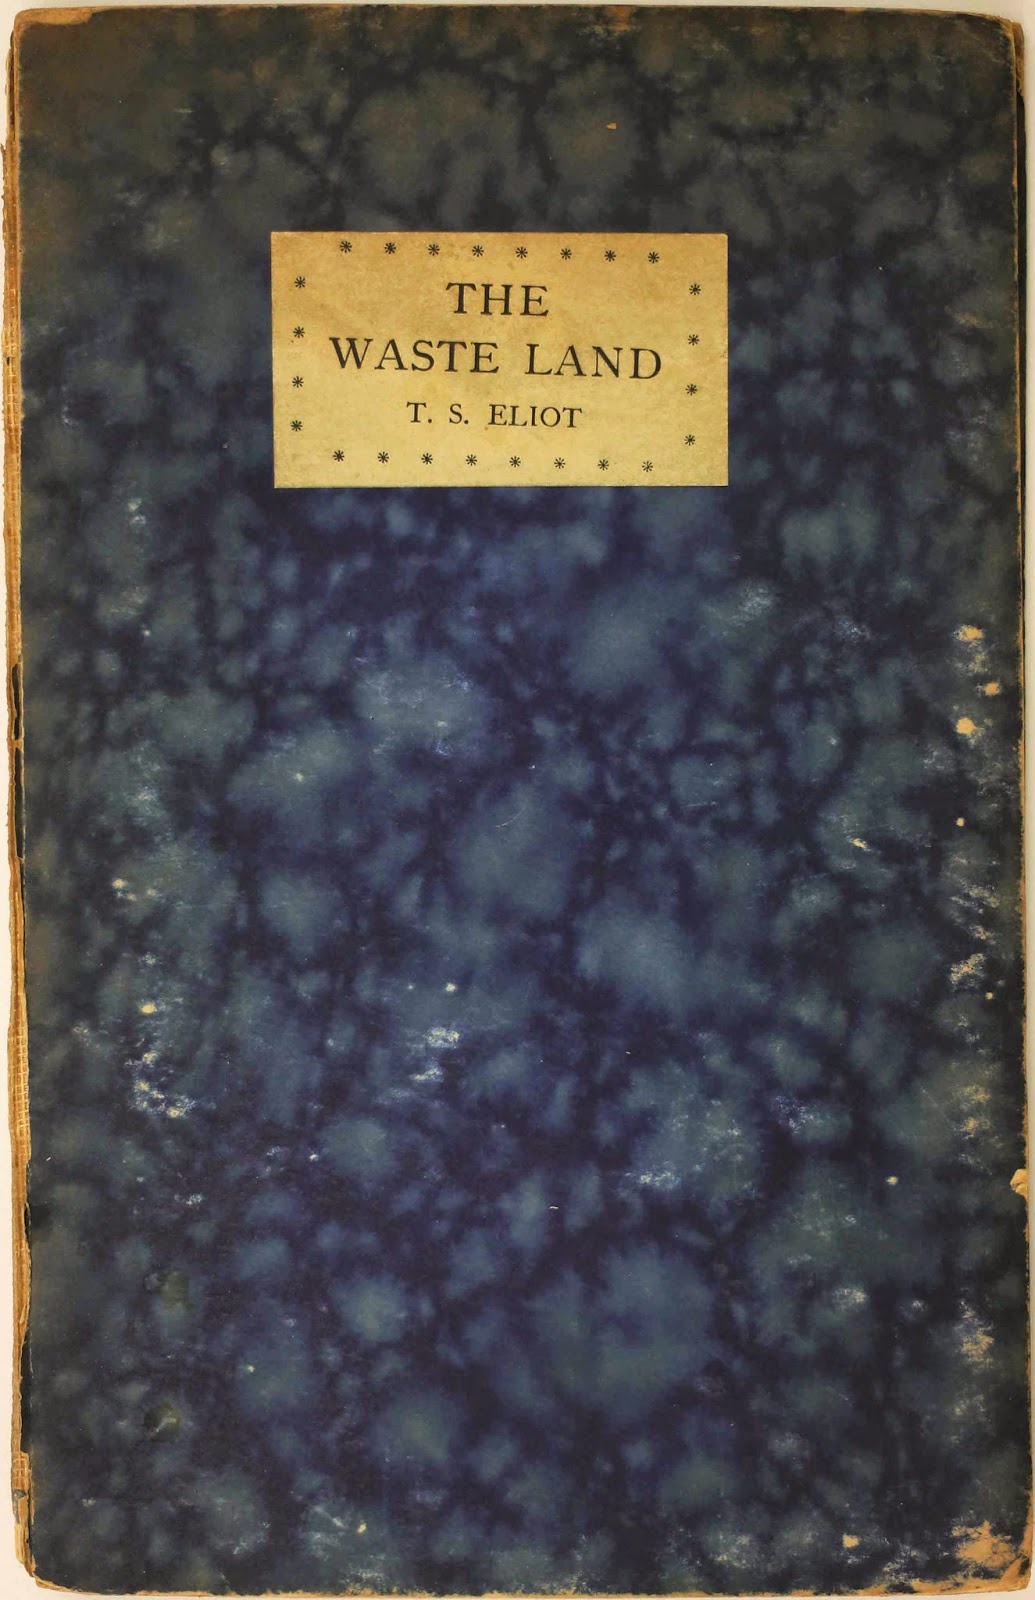 T.S. Eliot's "The Waste Land" cover